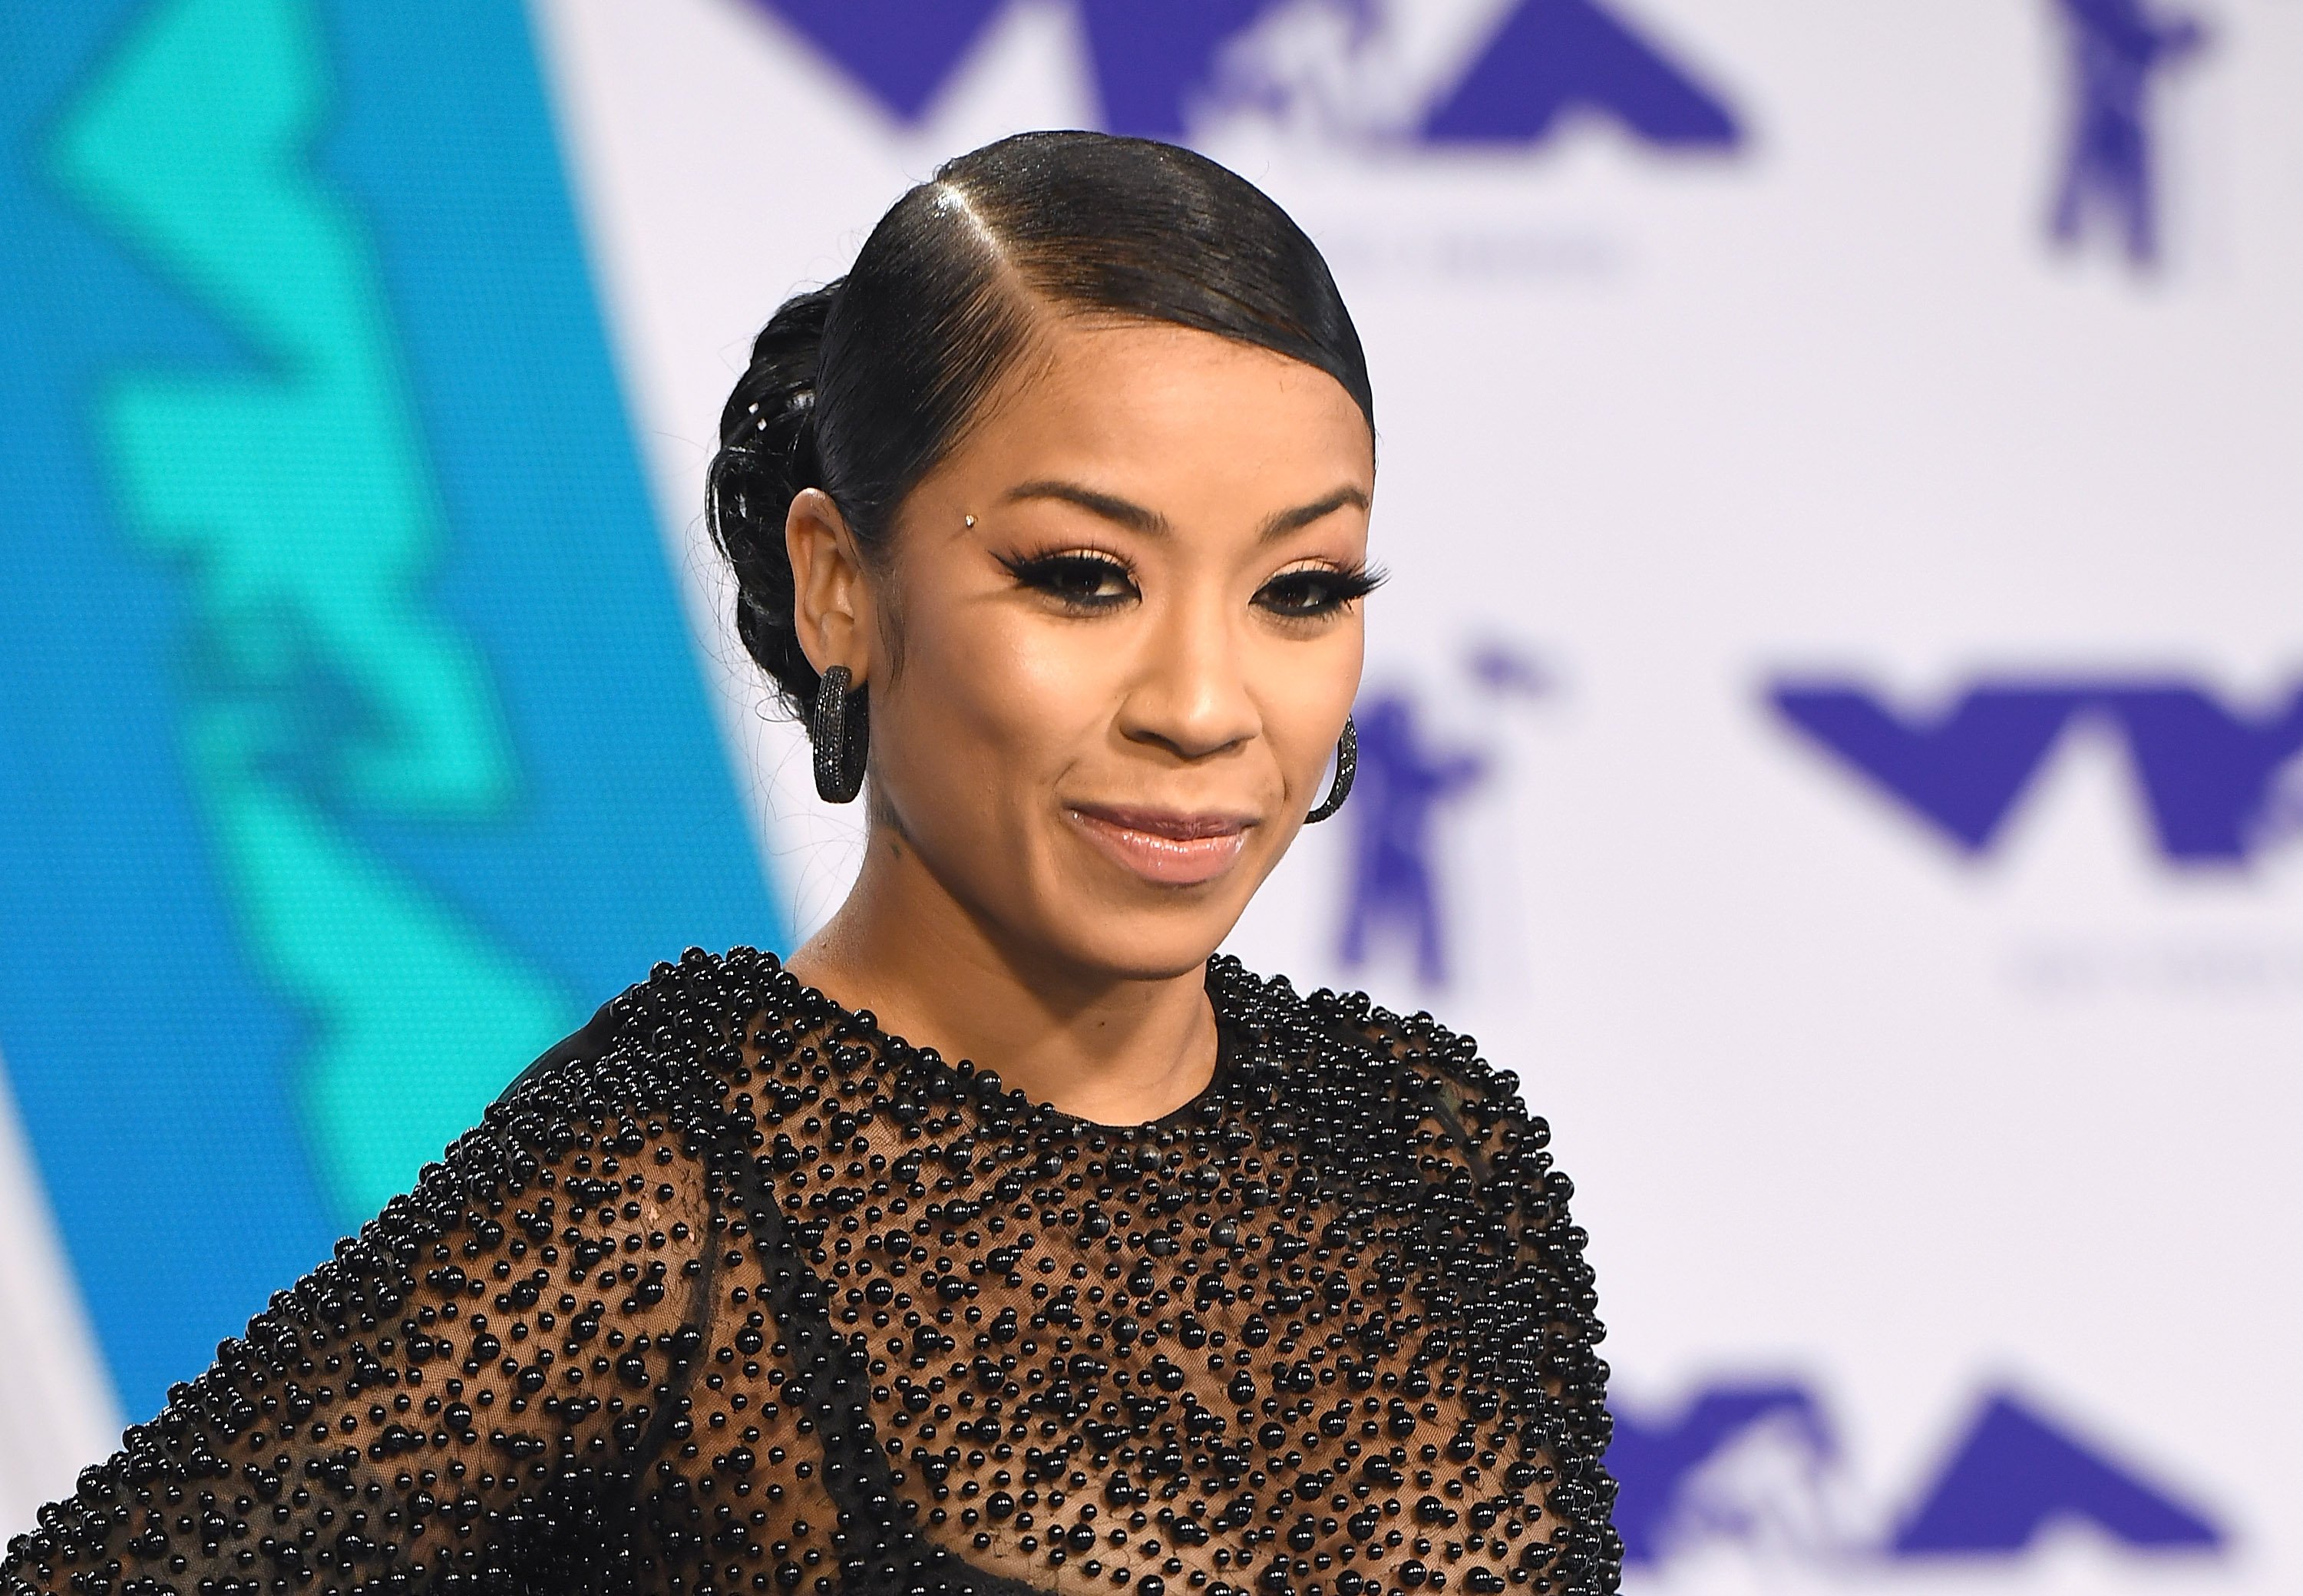 Keyshia Cole attends the 2017 MTV Video Music Awards. | Photo: GettyImages